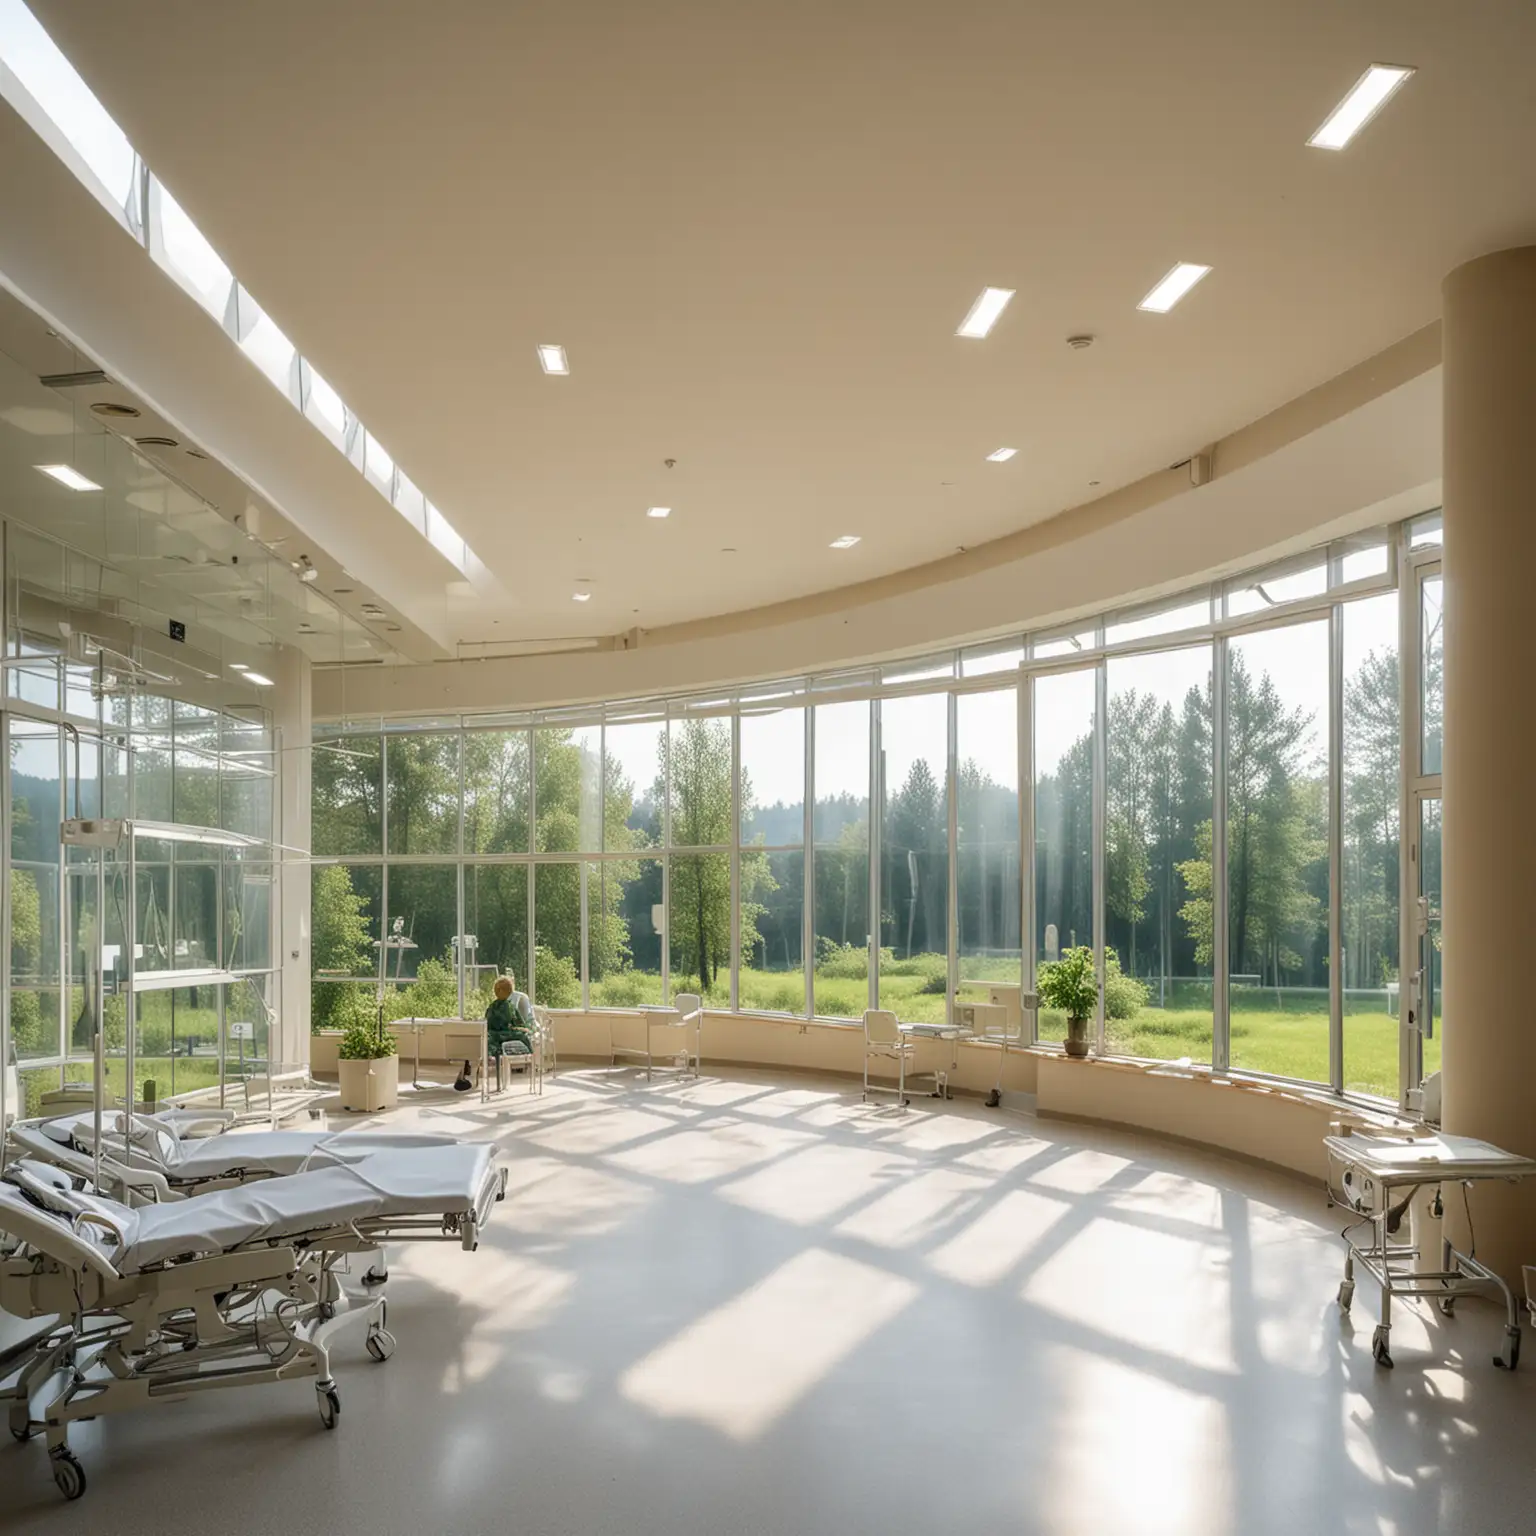 Comfortable Patients in a Modern Hospital with Natural View